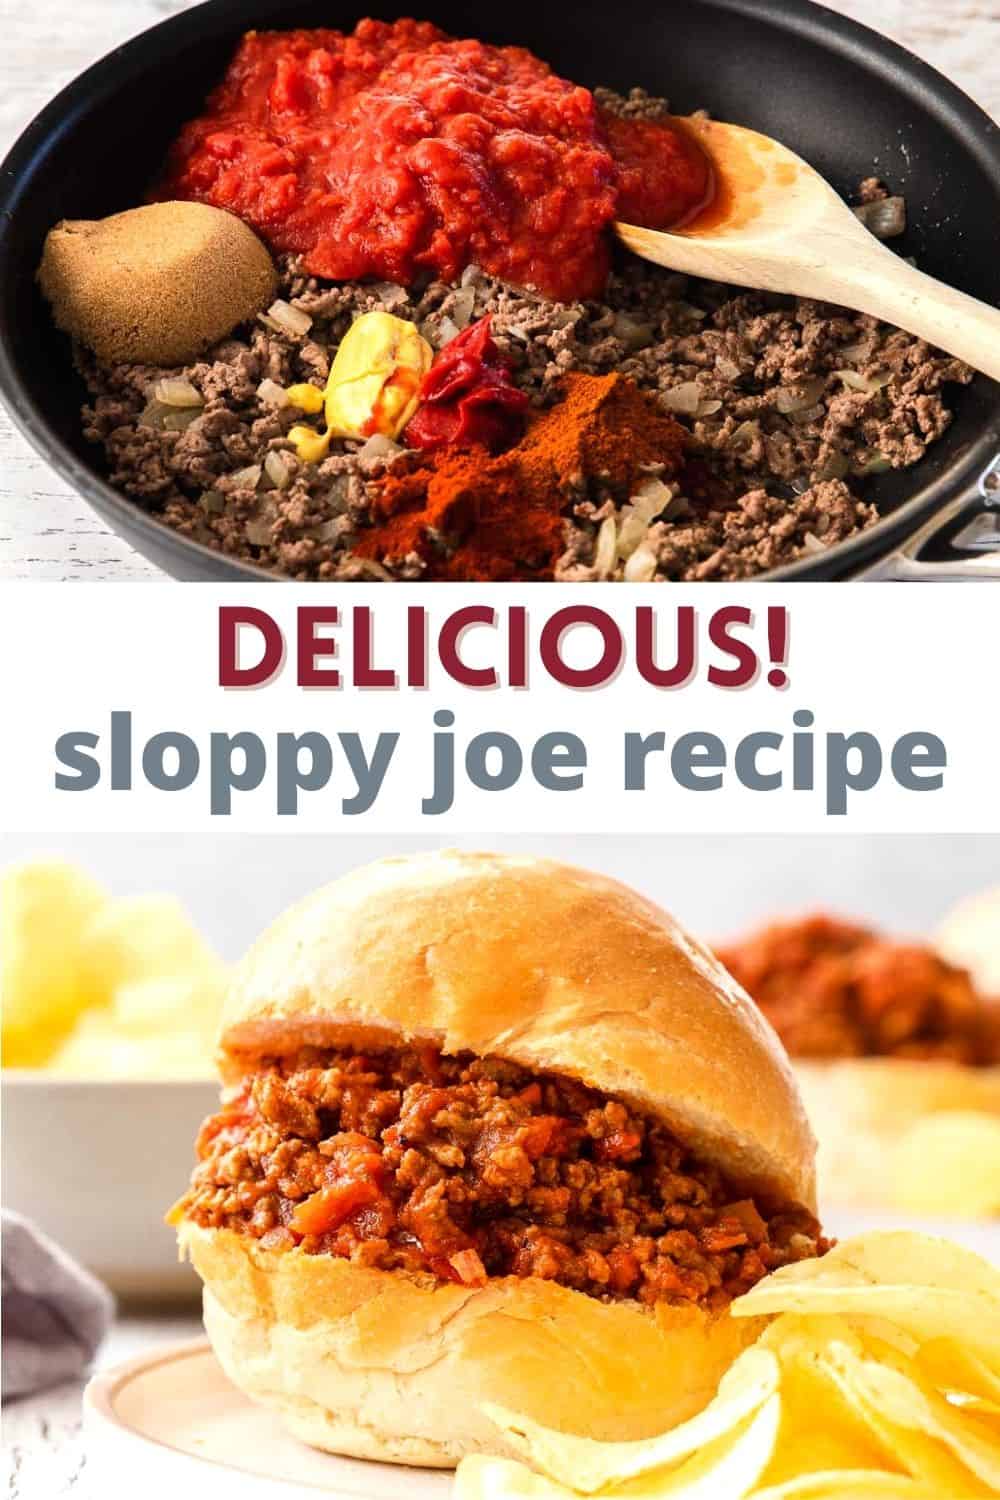 Our favorite sloppy joe recipe is easy and full of delicious flavors with real ingredients. Forget the canned sauce or mix packet and find the very best homemade sloppy joes right here!